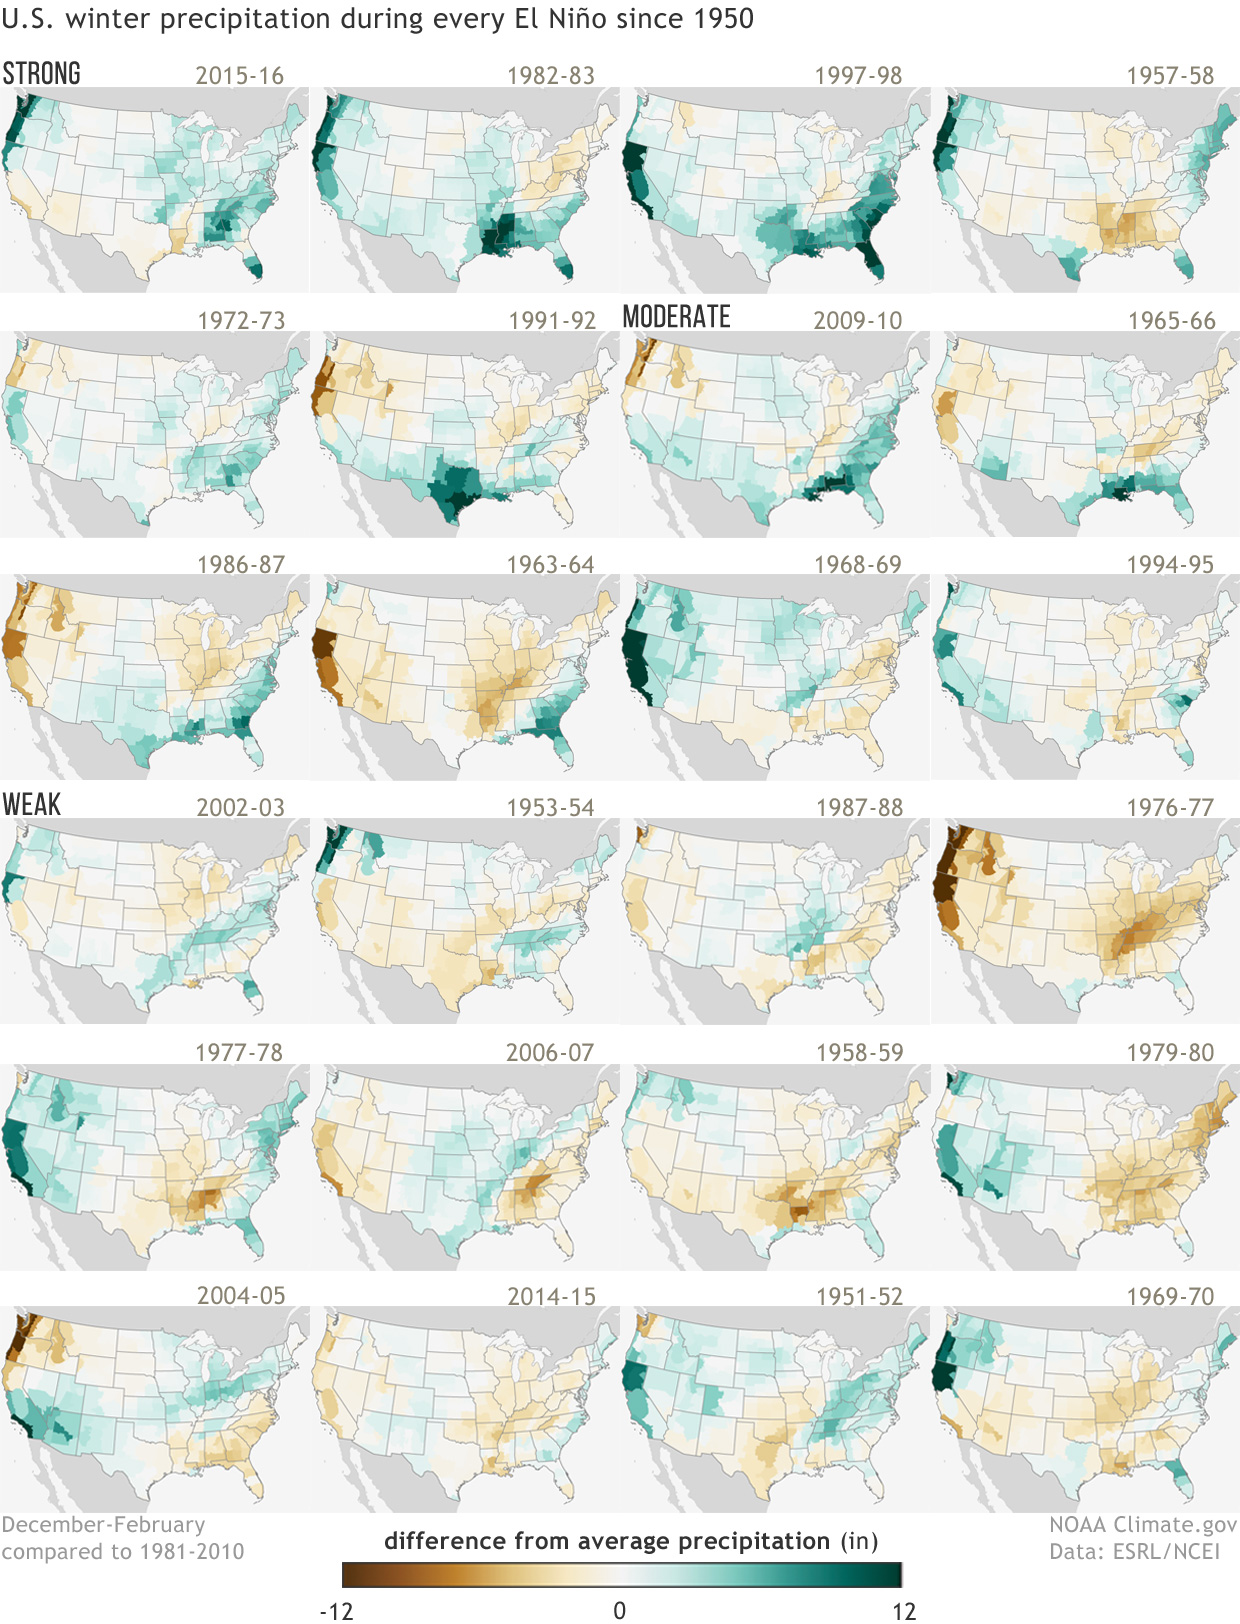 A Look at Winter Temperatures and Precipitation for Every El Nino Since 1950